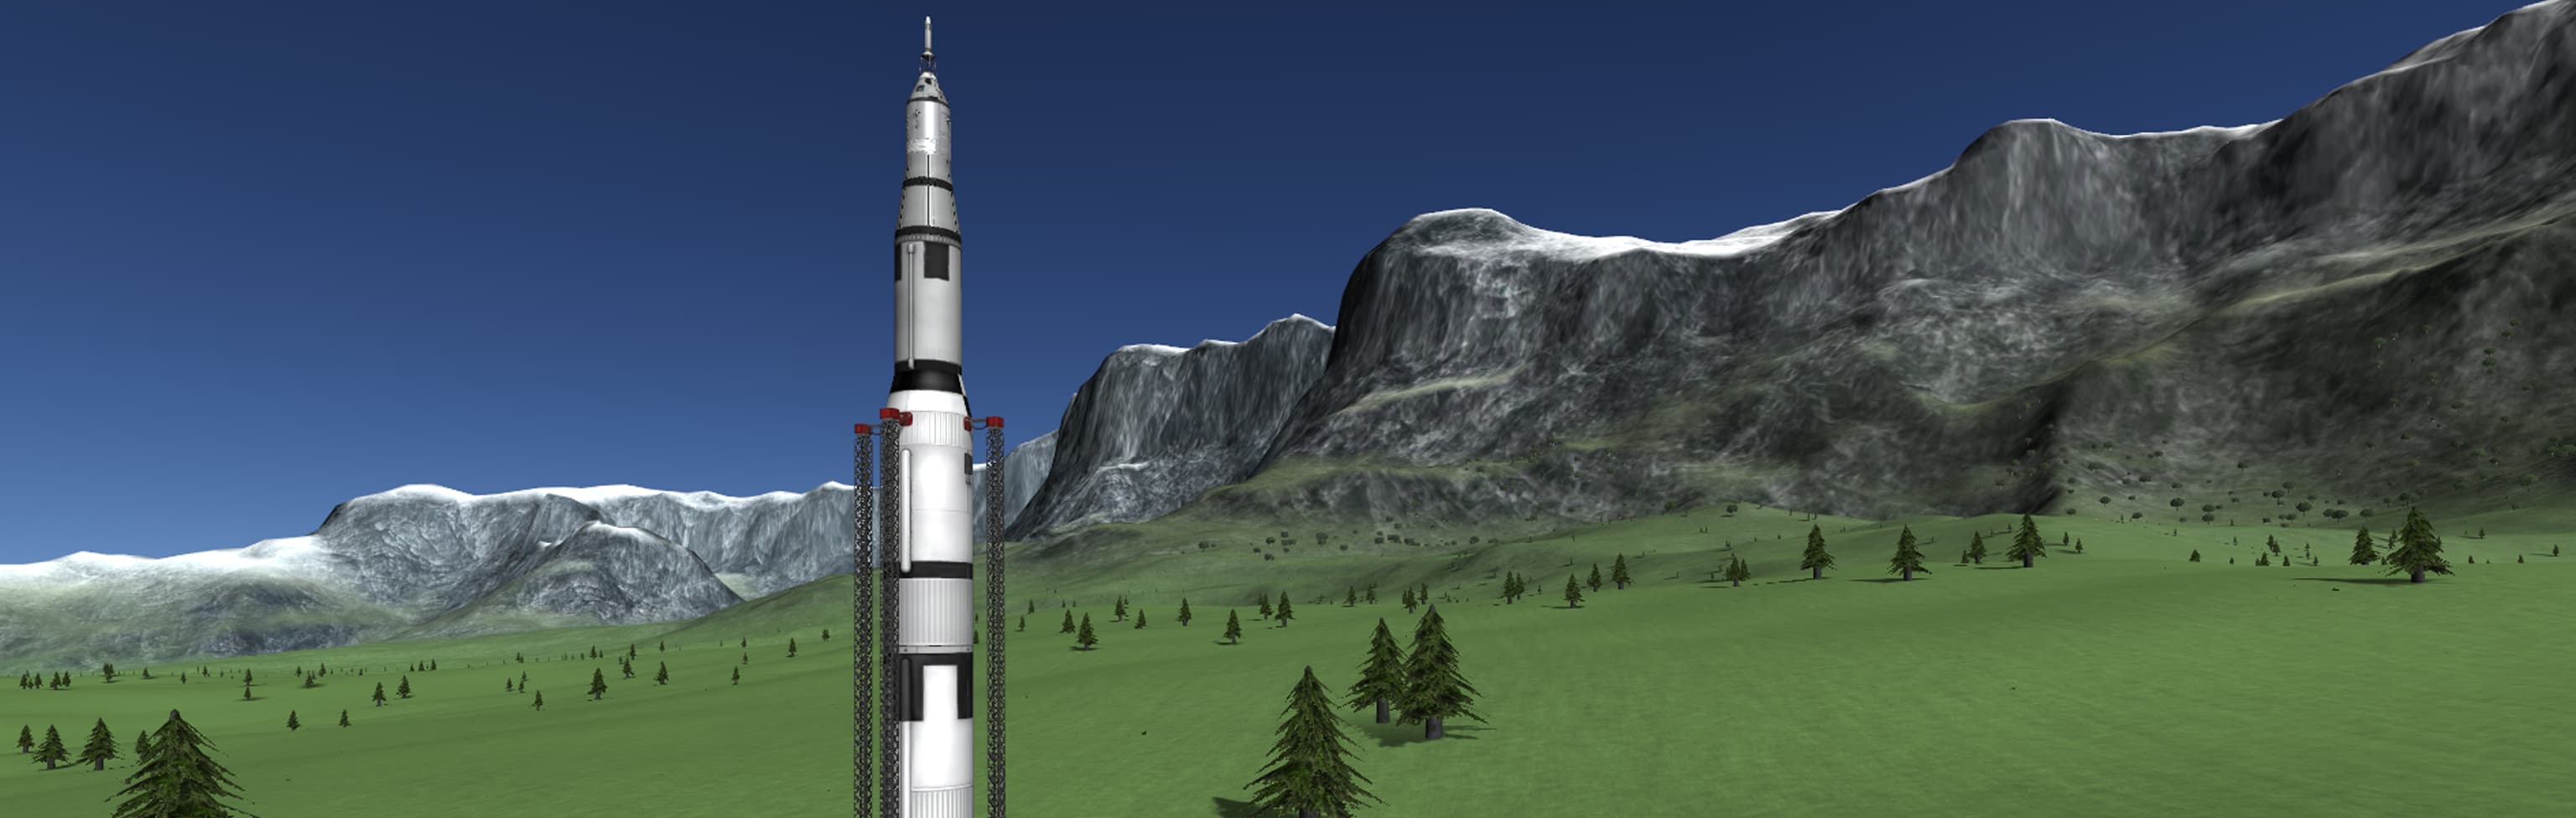 kerbal space program 2 system requirements